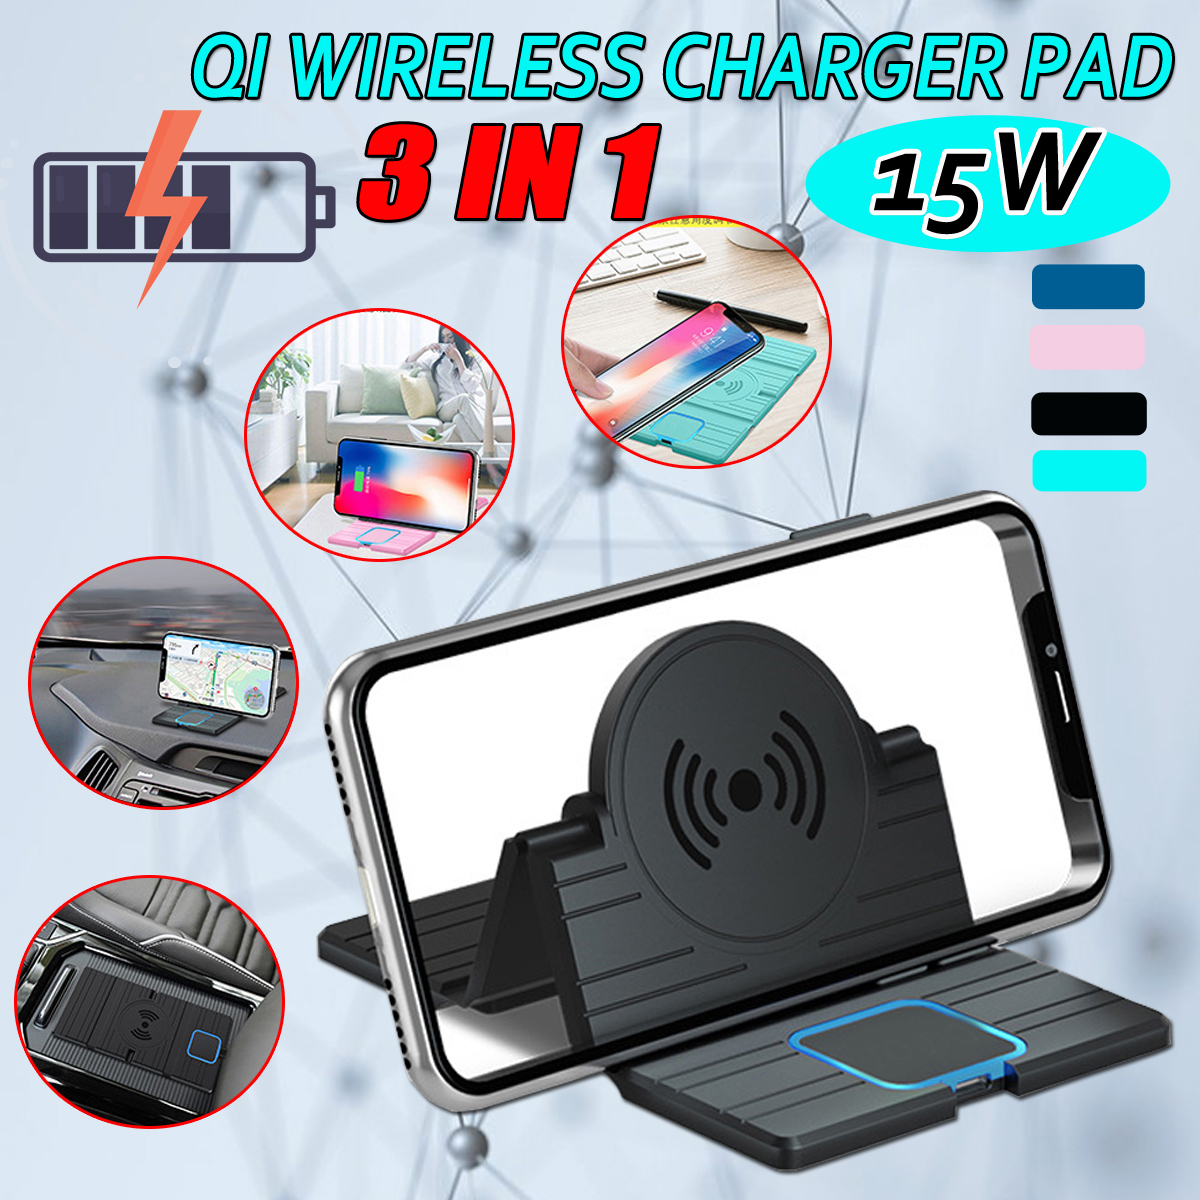 15W-Qi-Wireless-Charger-Car-Charger-Pad-Dashboard-Car-Phone-Holder-Car-Mount-Charging-Stand-Dock-Pad-1598451-1